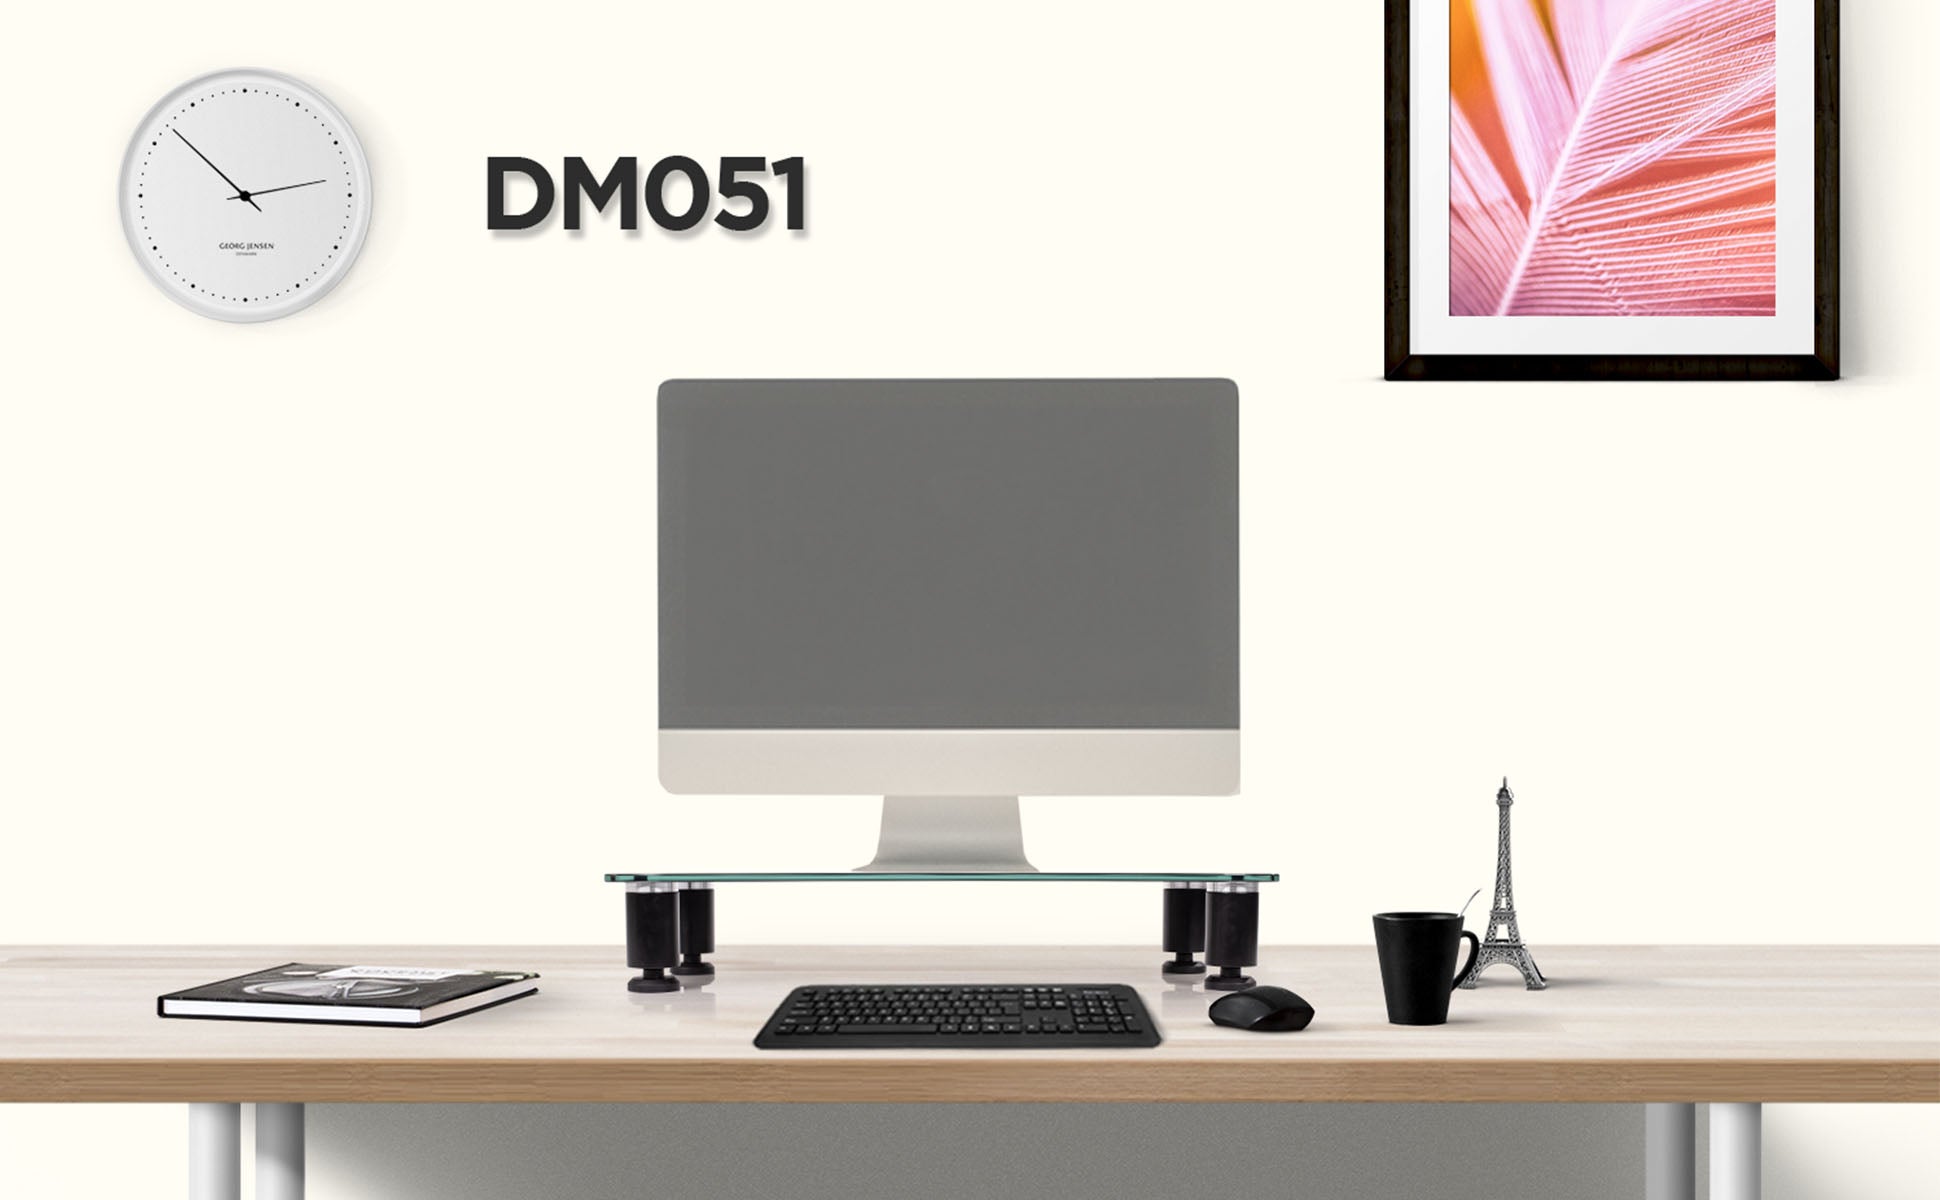 dm451x1, silver, desk, mount, bracket, stand, support, riser, arm, double, two, twin, duo, dual, office, computer